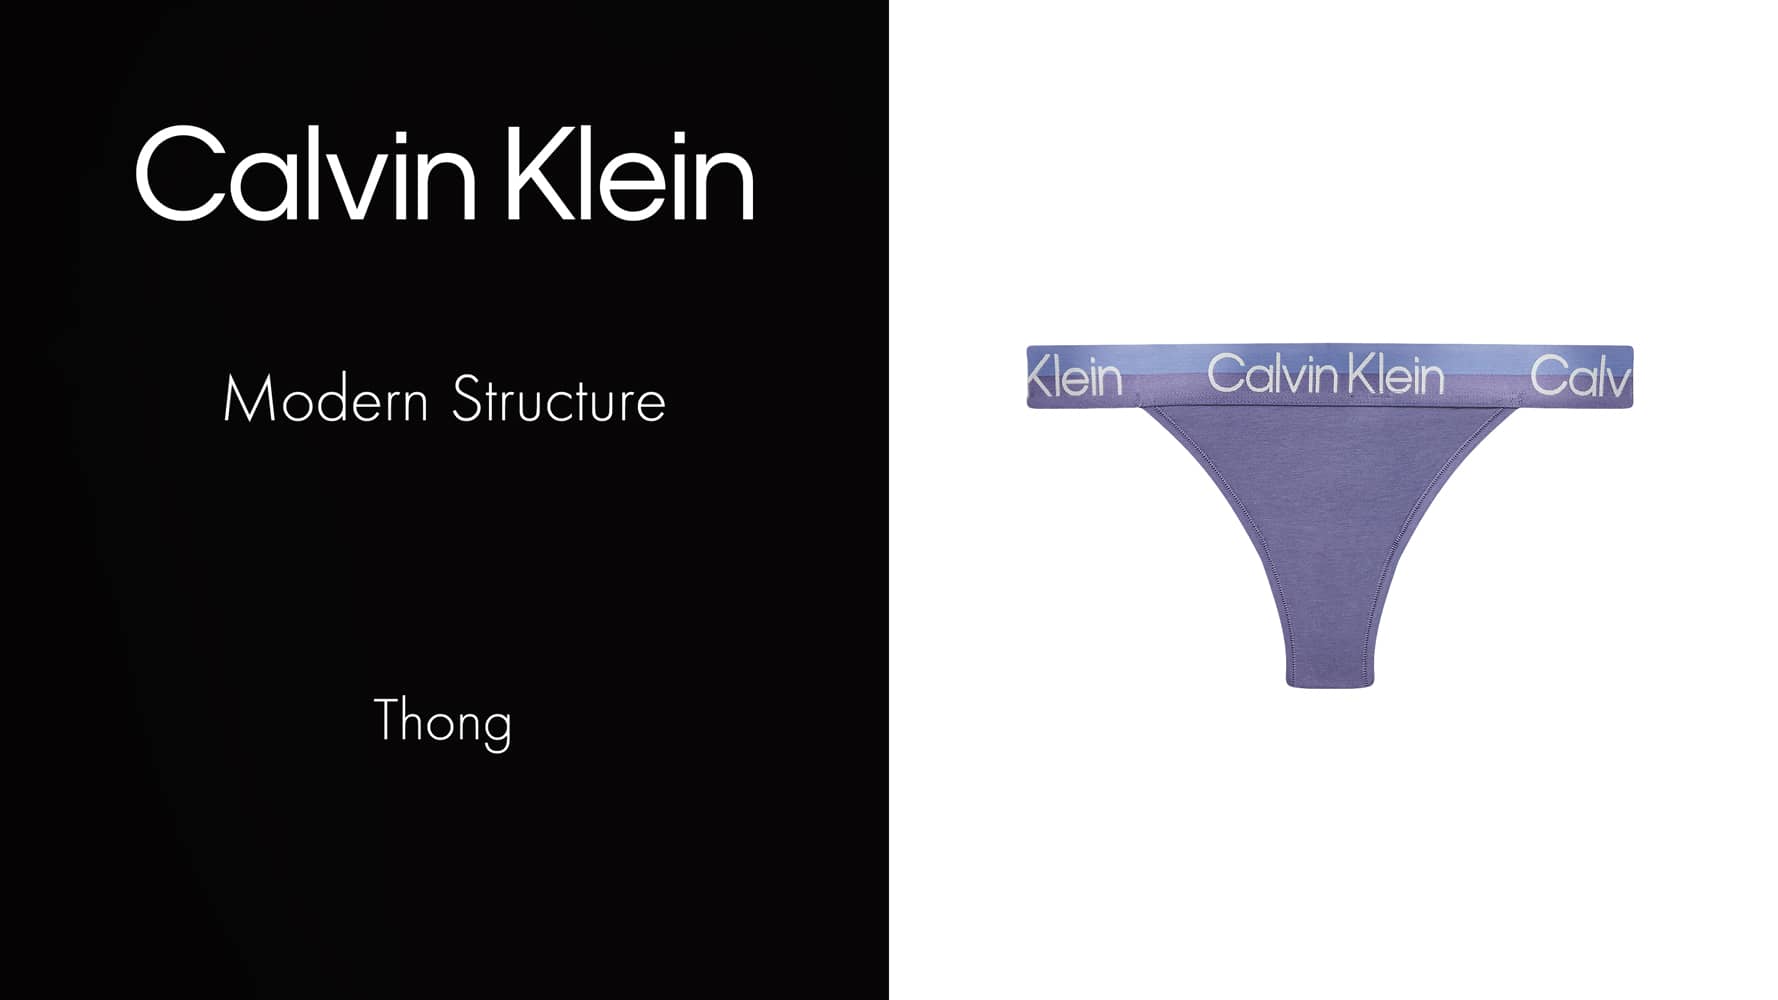 Thong - Modern Structure